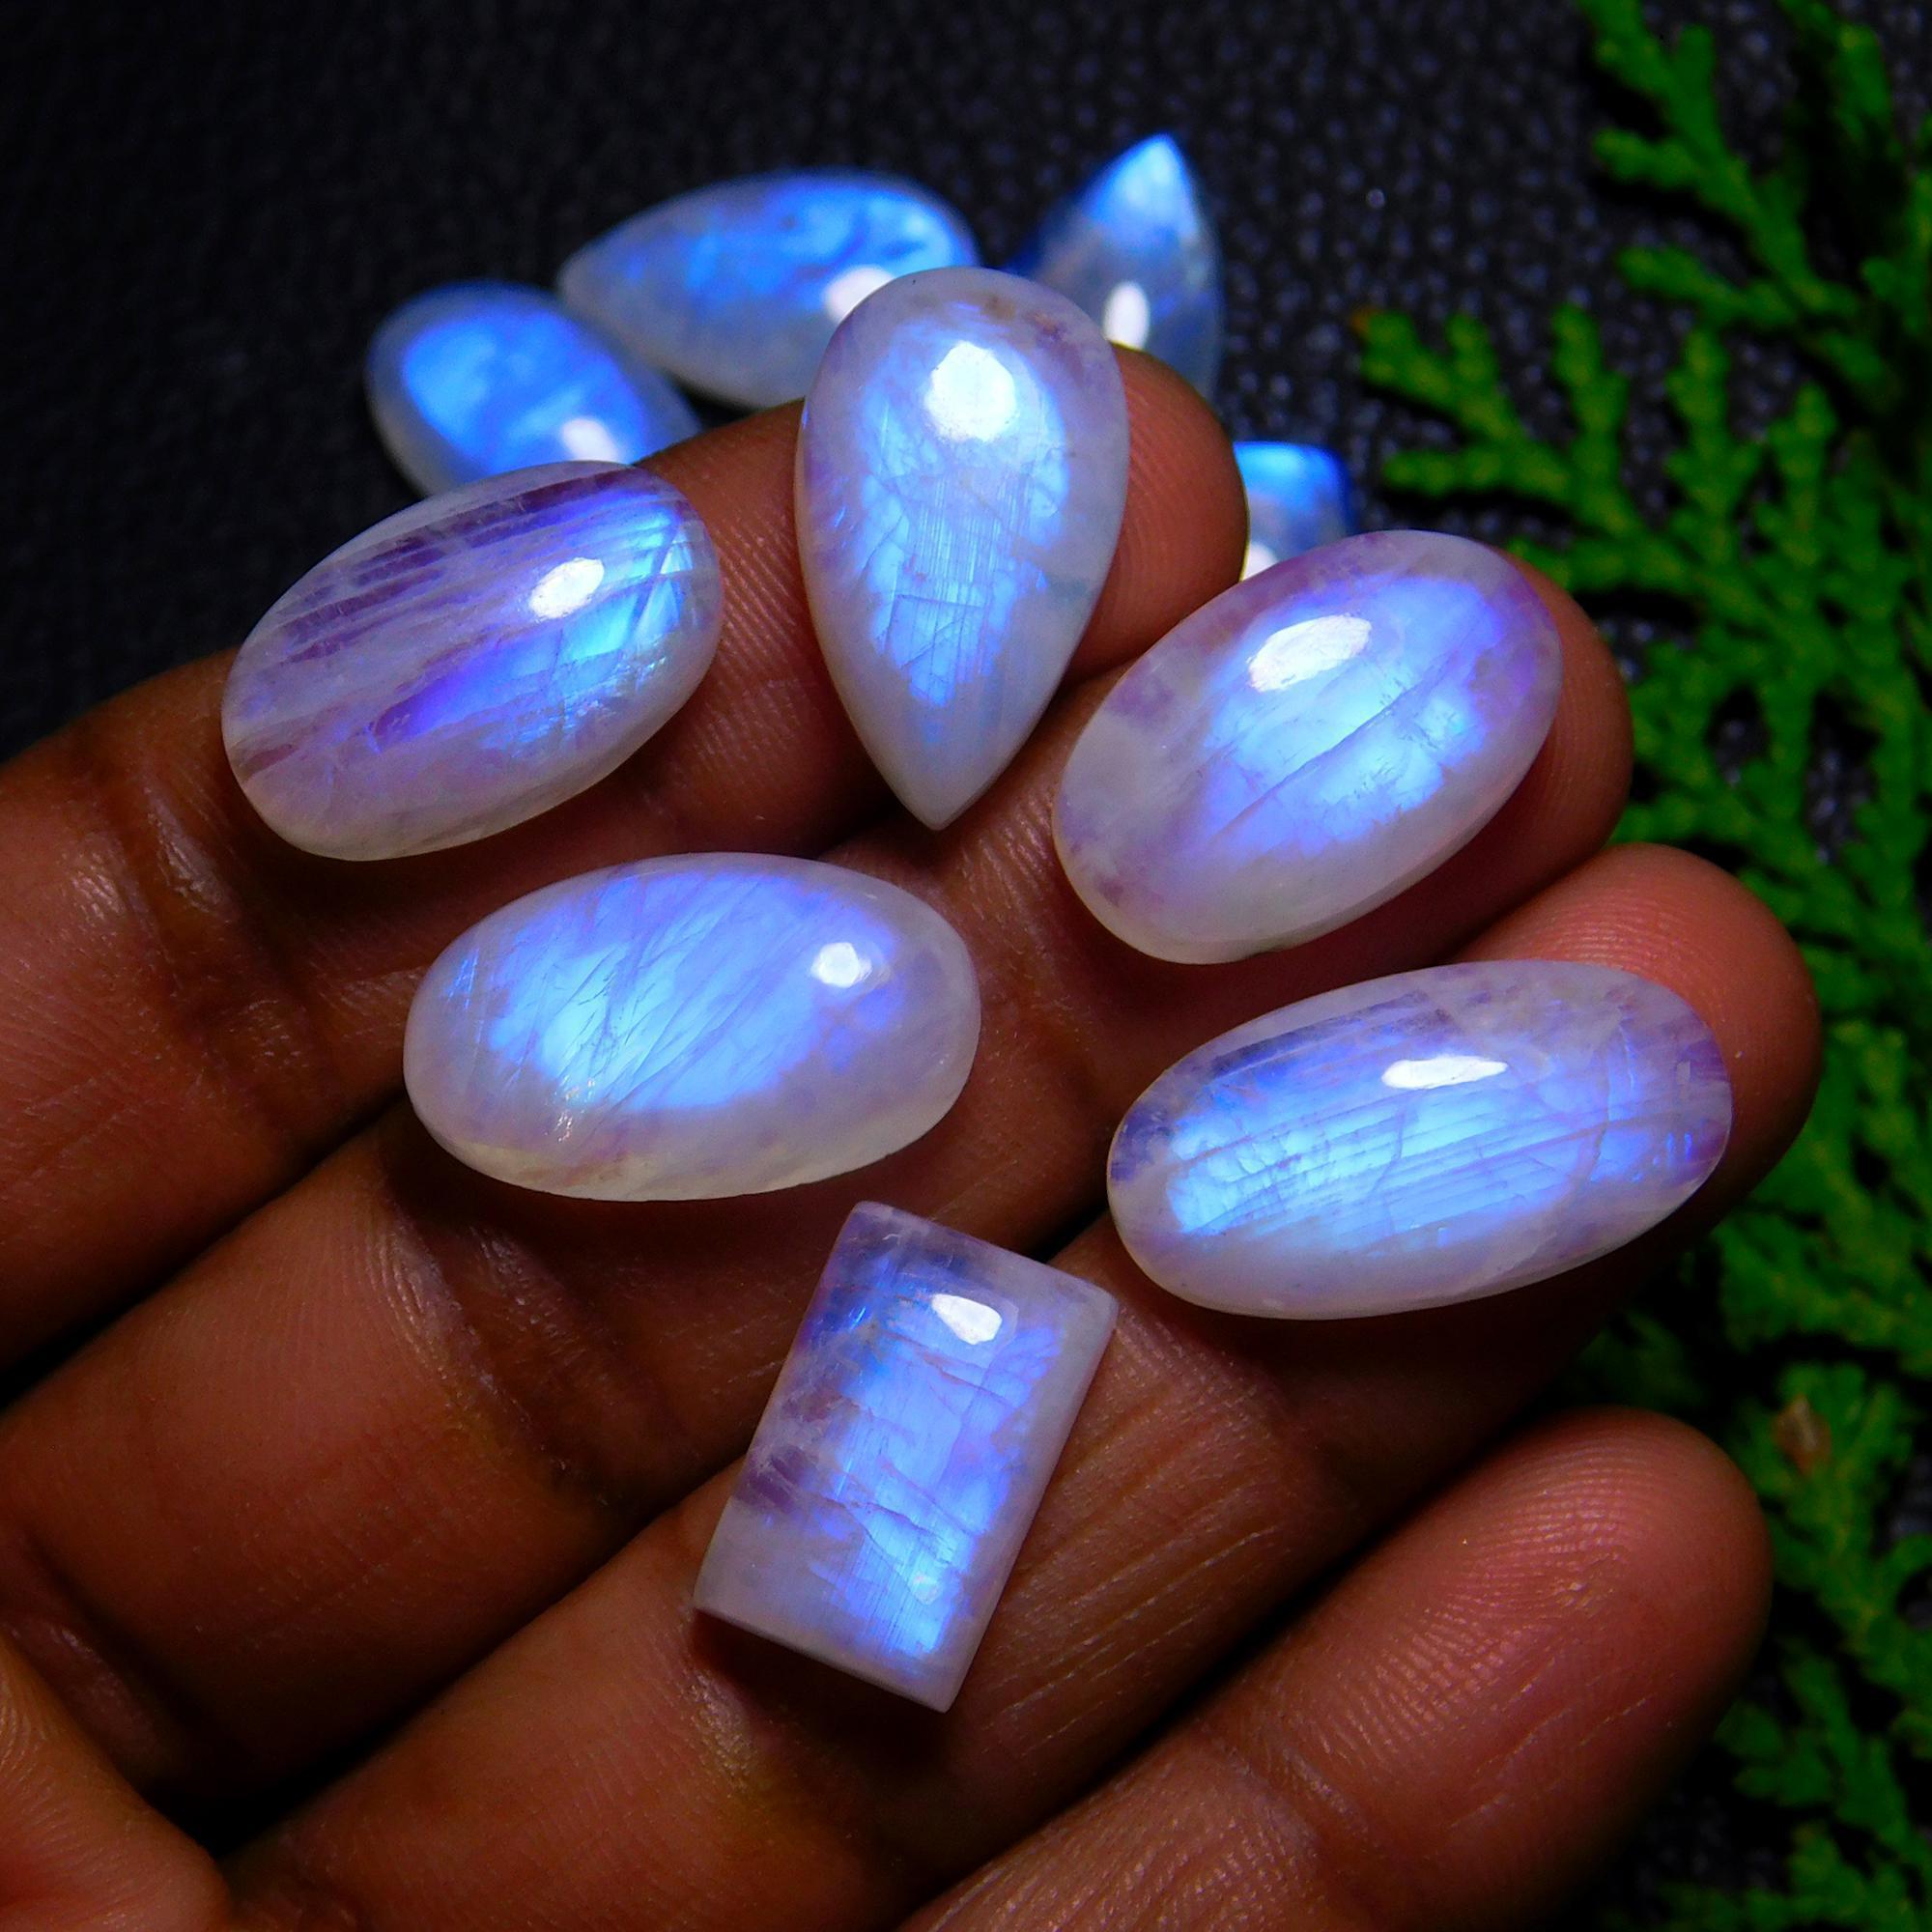 14Pcs 136Cts Natural Rainbow Moonstone Cabochon Blue Fire Loose Gemstone Crystal jewelry supplies wholesale lot gift for her Black Friday 20X12 12X12mm#9414